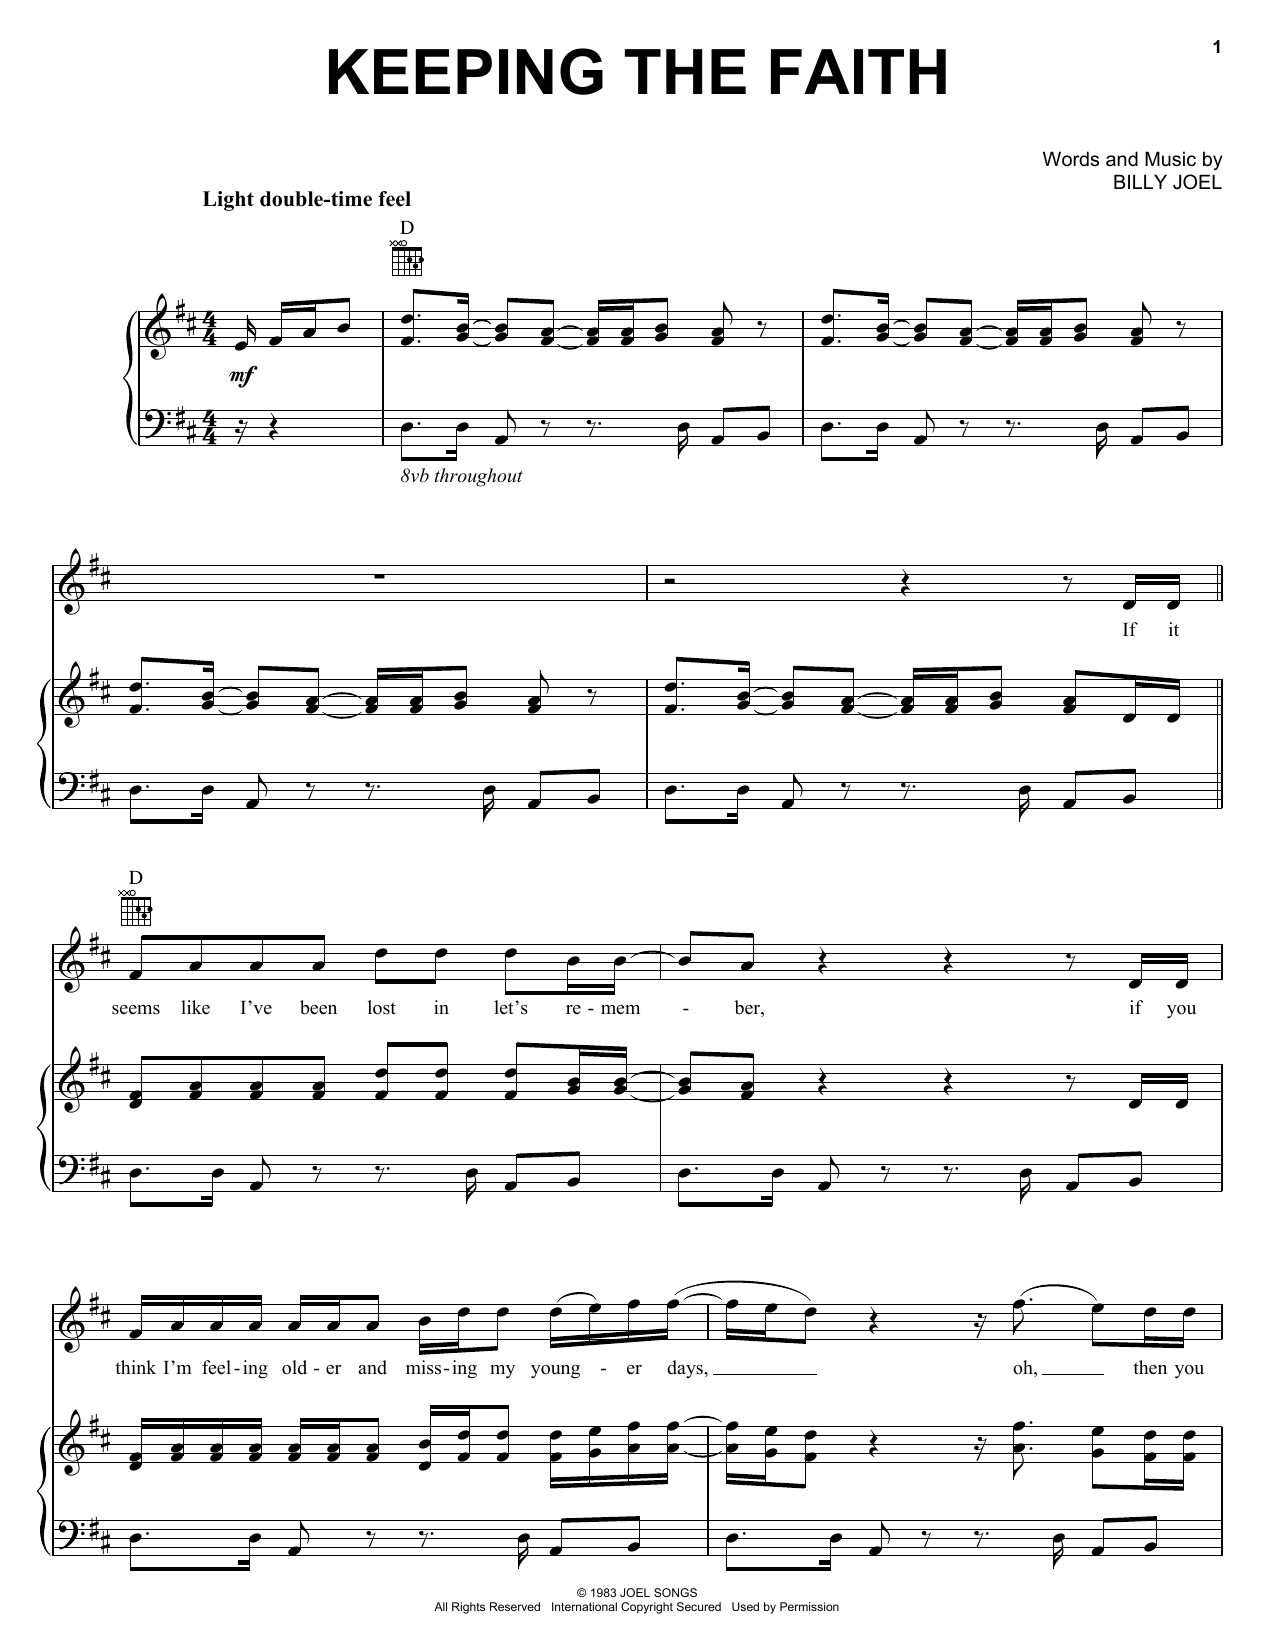 Billy Joel "Keeping The Faith" Sheet Music Notes | Download Printable